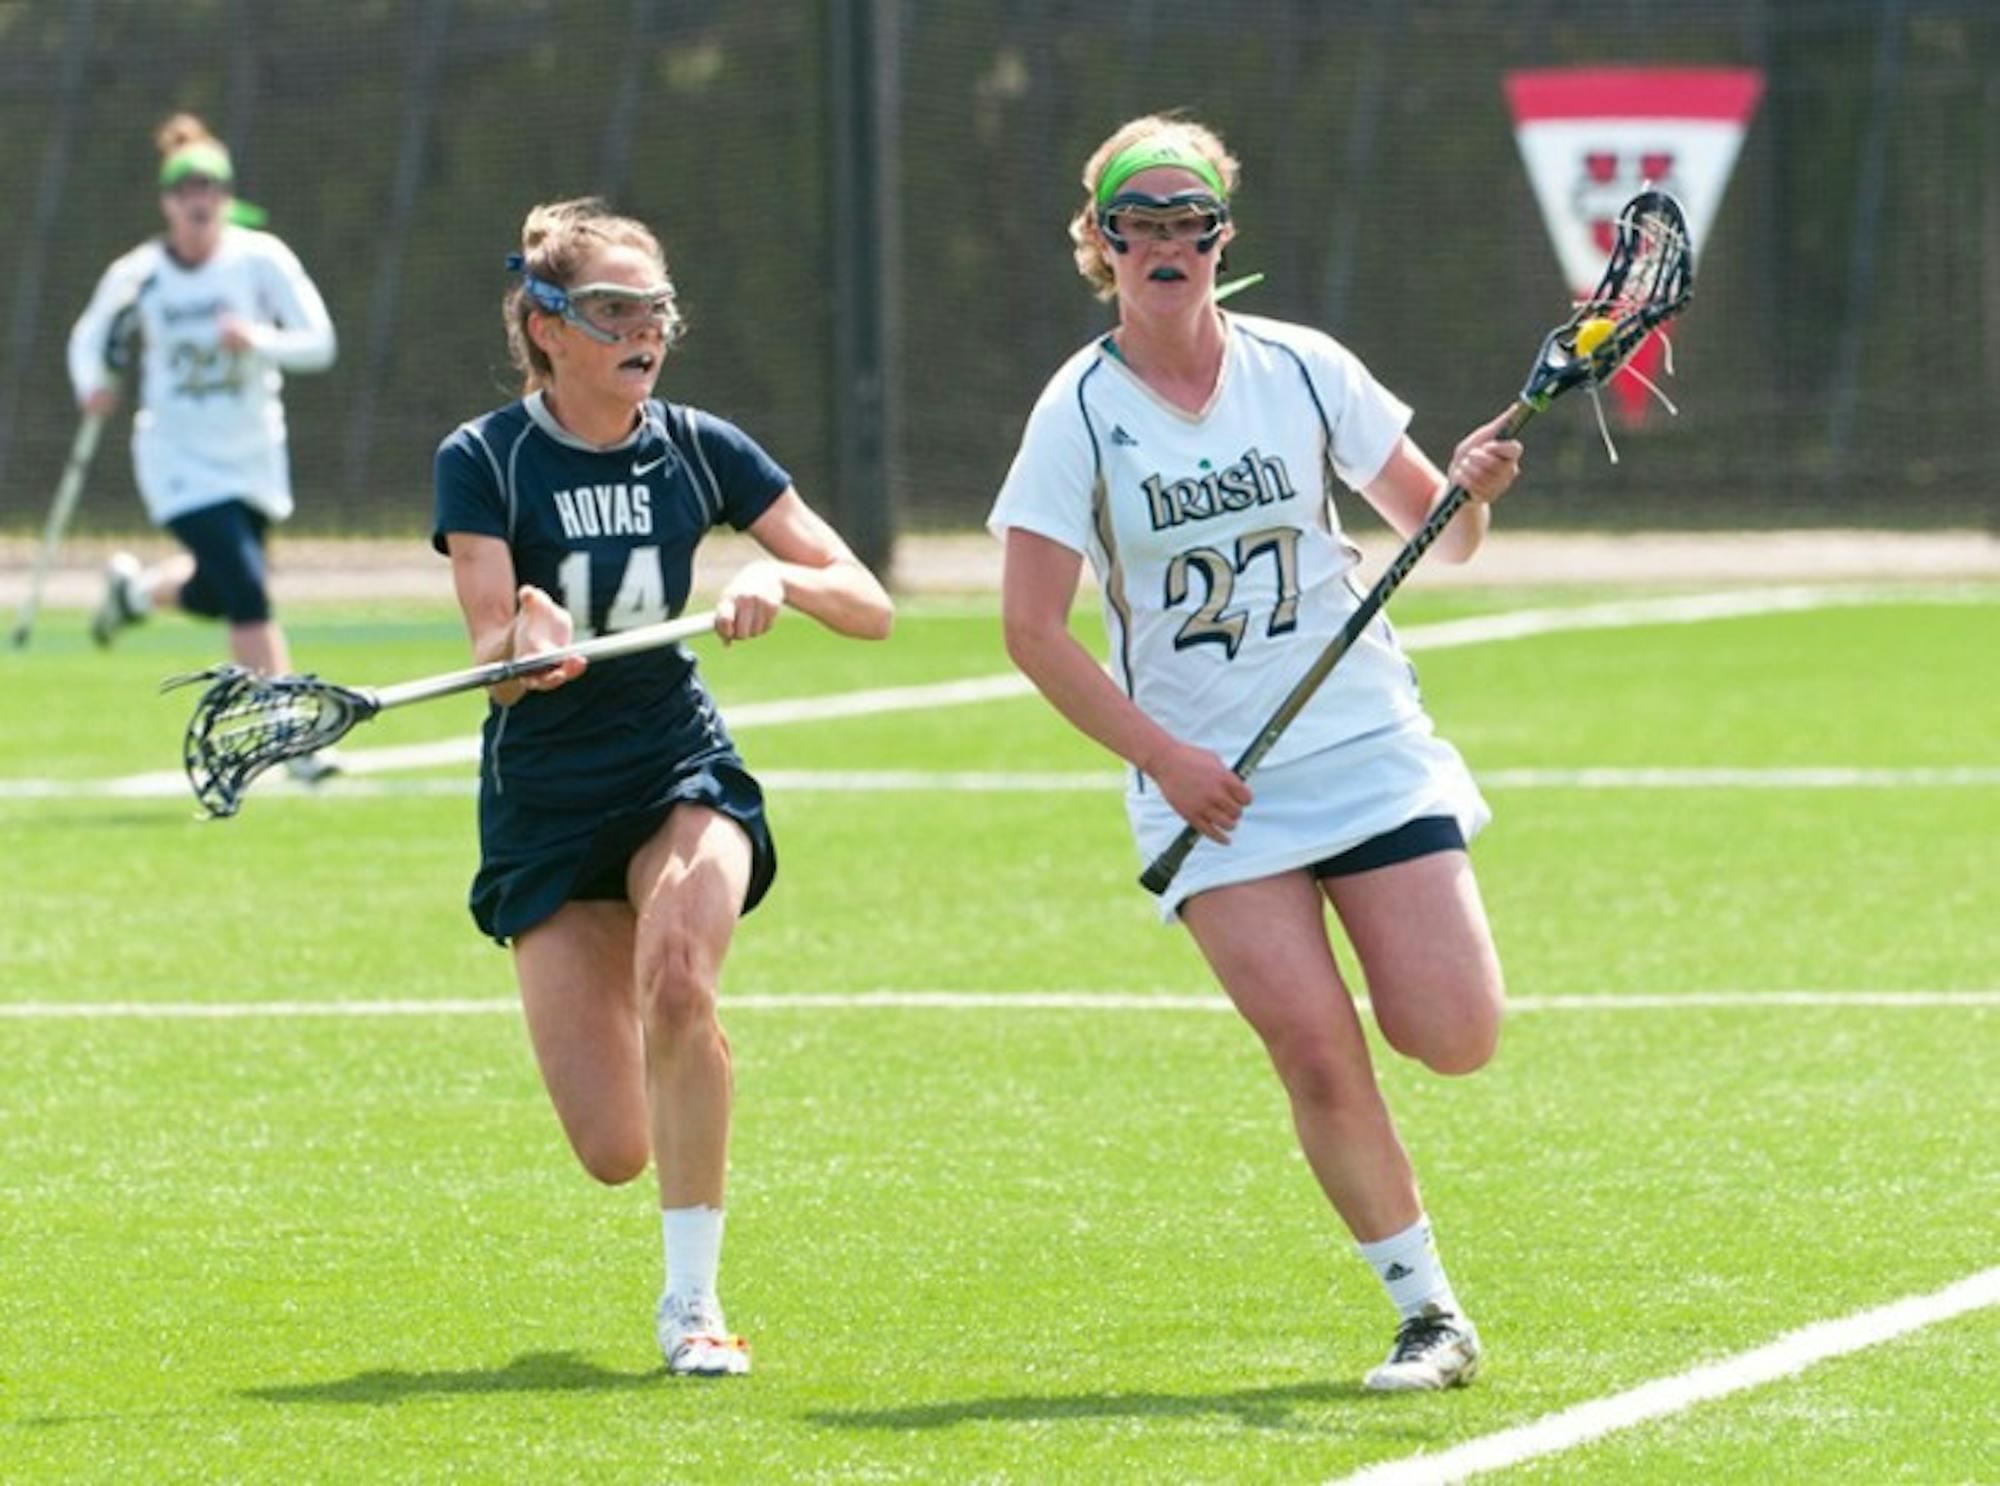 Irish senior defender Molly Shawhan sprints past a Georgetown defender in Notre Dame’s 13-12 victory over the Hoyas last season on April 14. Shawhan was recently named a co-captain for the upcoming season.